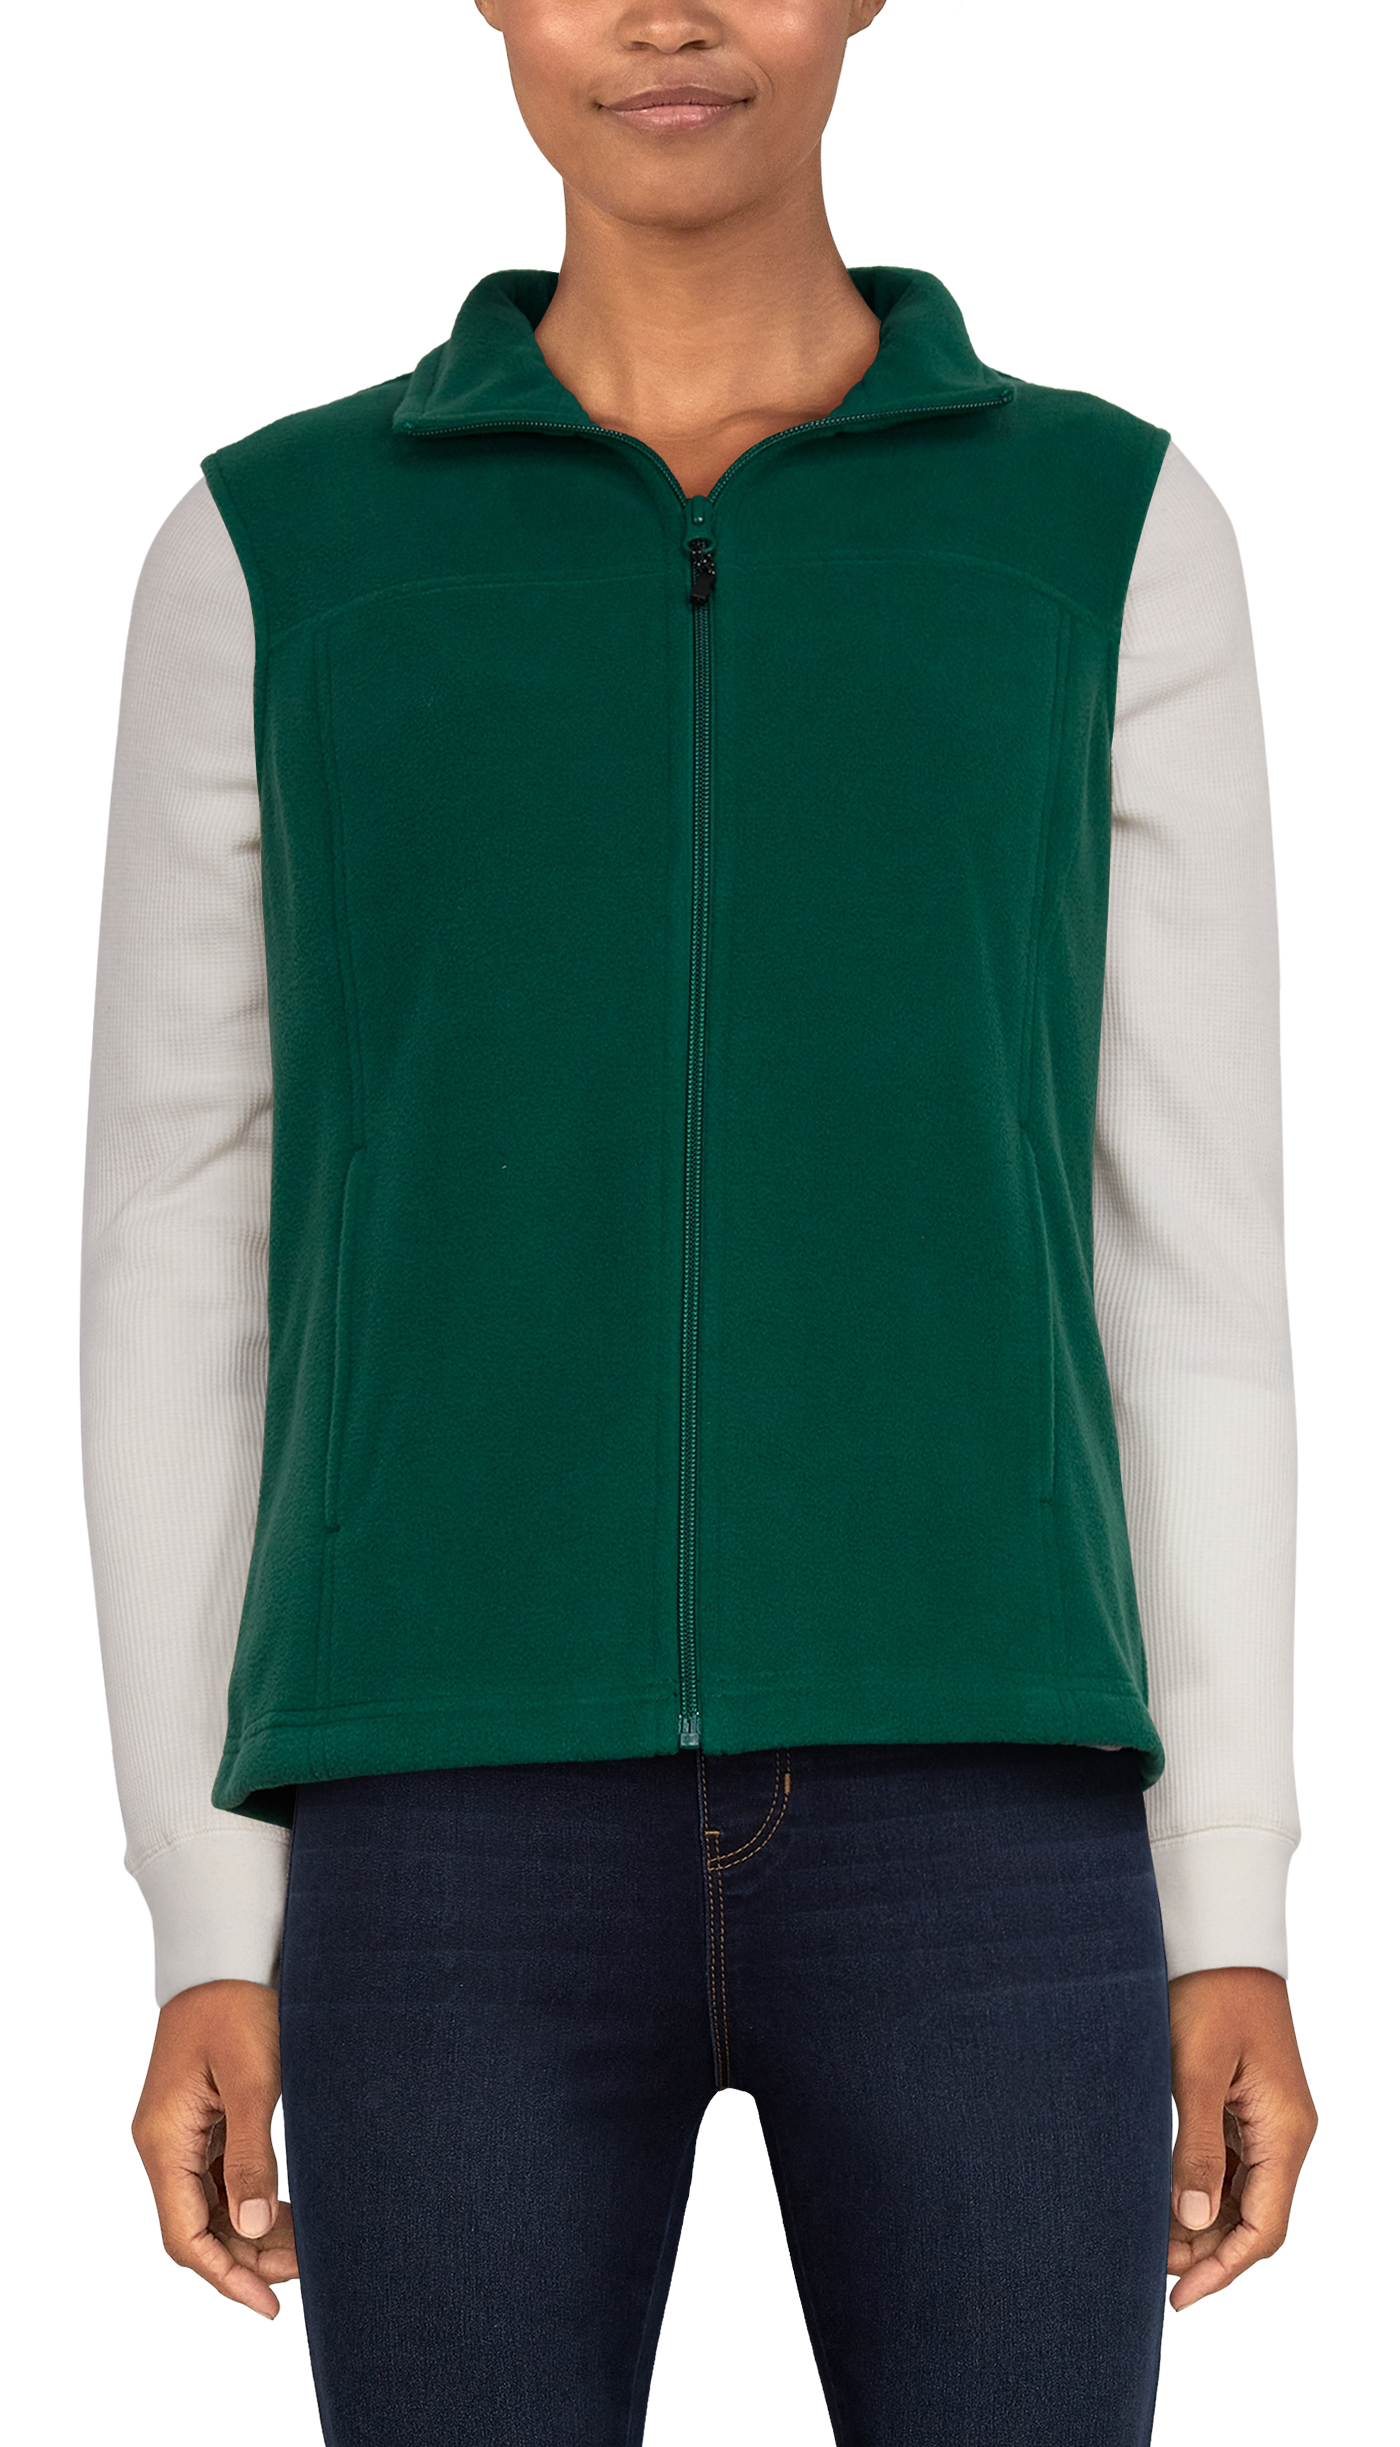 Natural Reflections Zip-Up Fleece Vest for Ladies - Evergreen - L product image